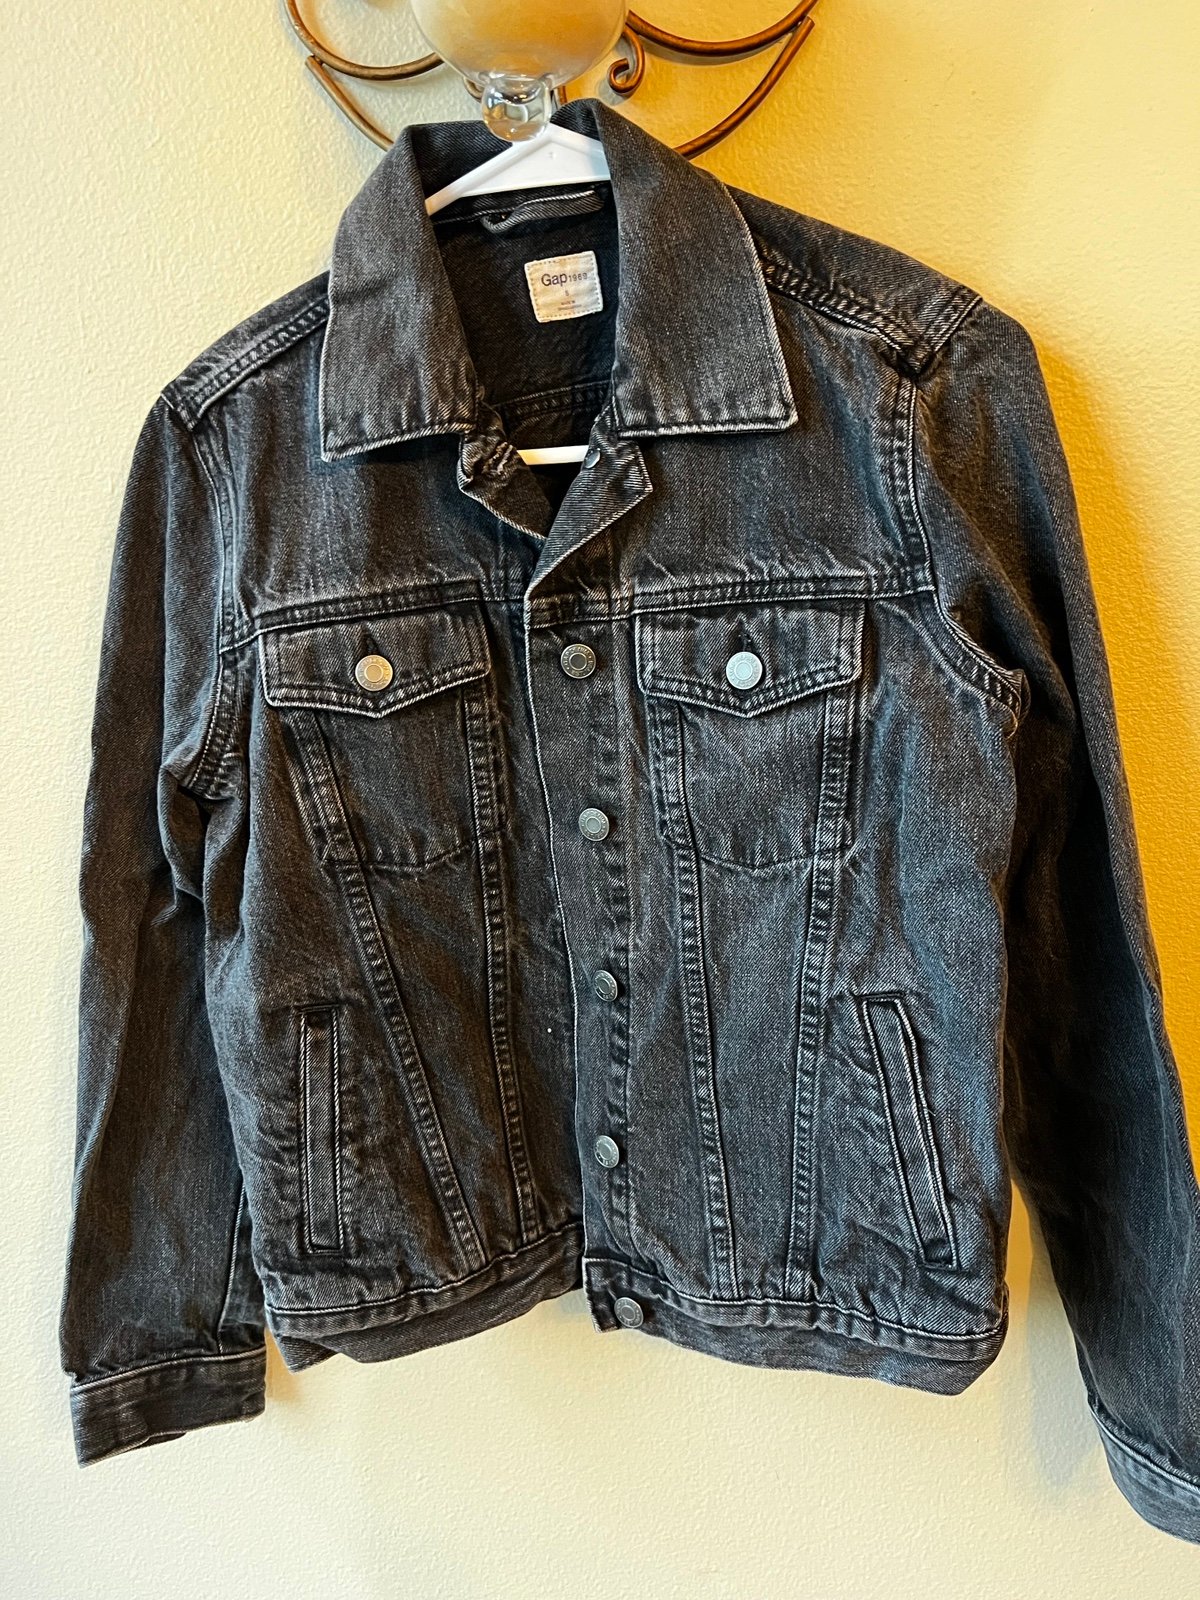 Gorgeous Gap denim jacket size small charcoal gray. Great condition LwkBOLjyx outlet online shop